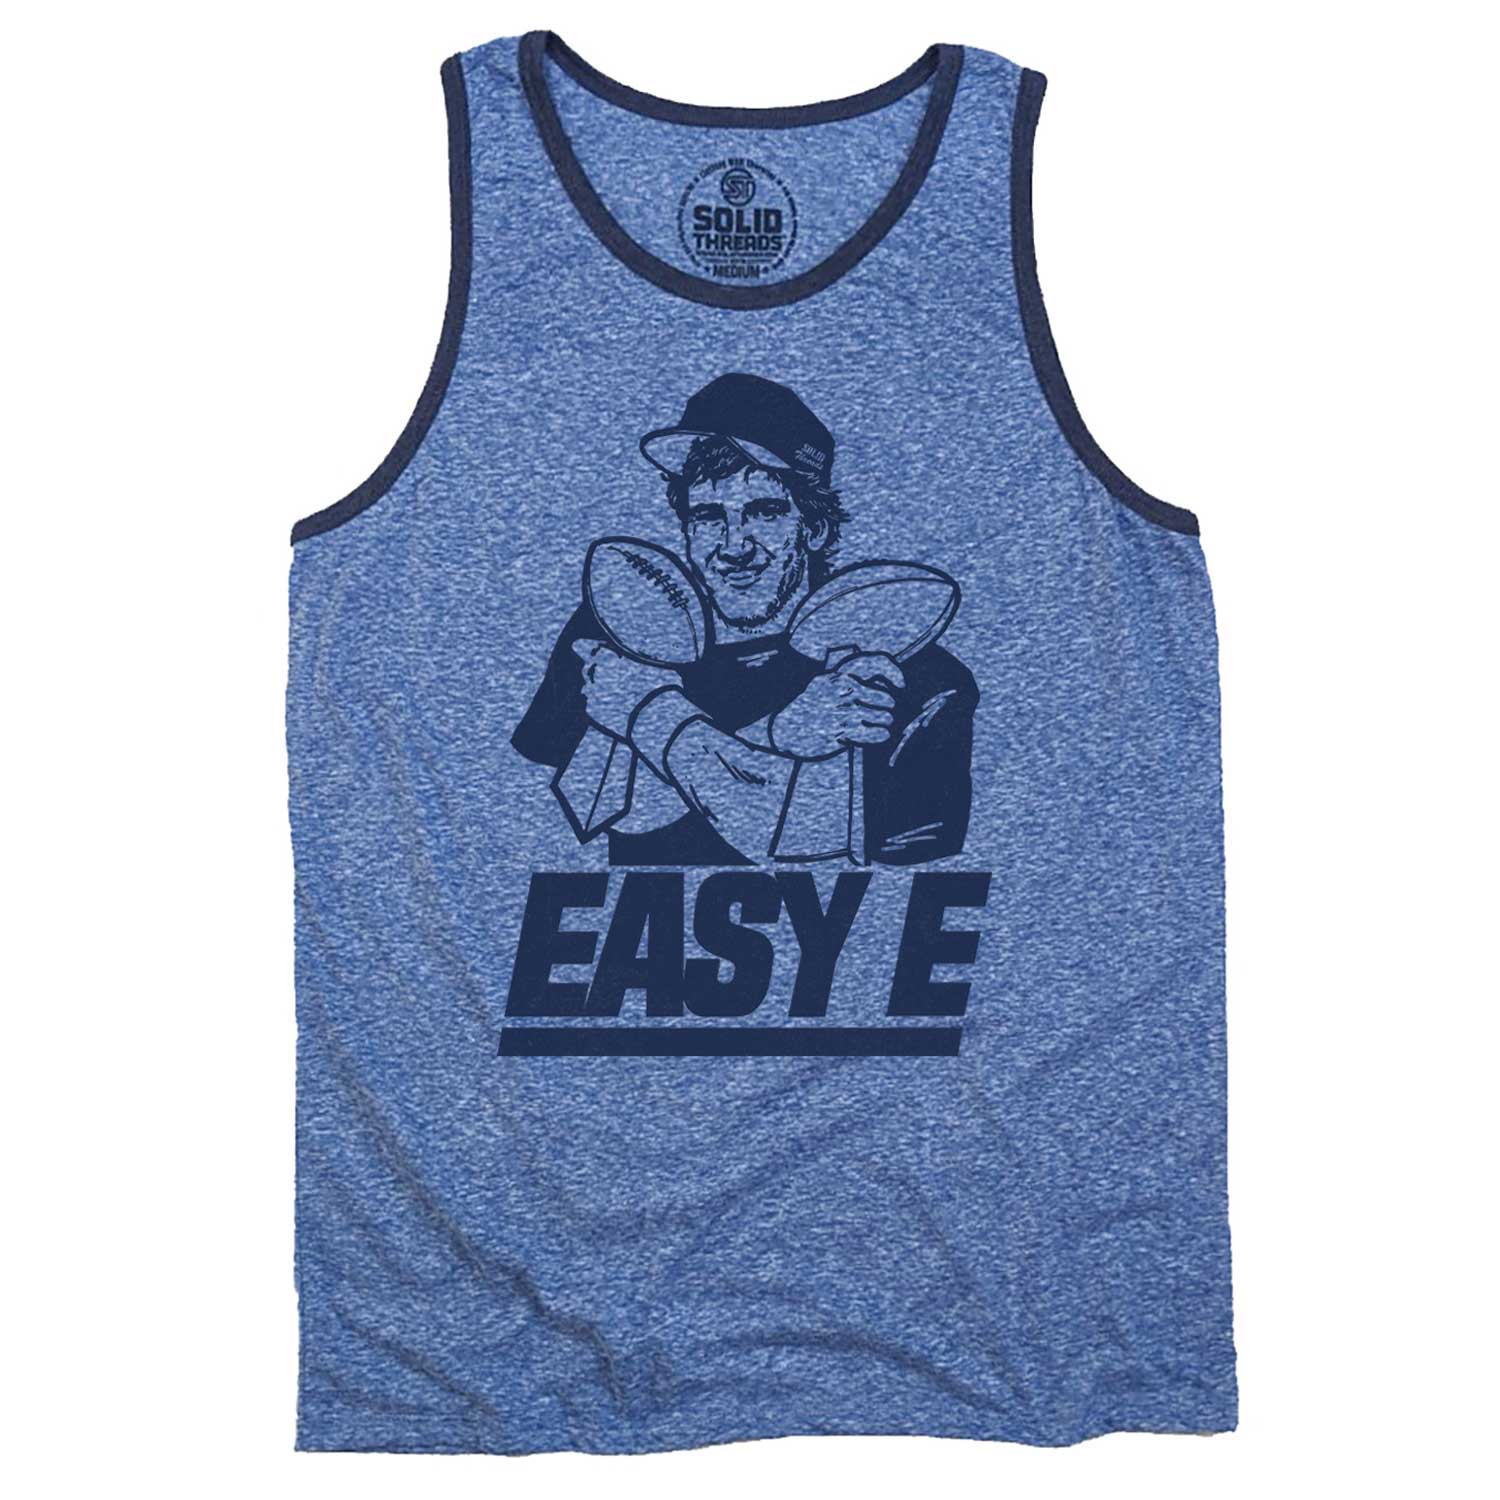 Men's Easy E Vintage Graphic Tank Top | Cool Eli Manning T-shirt | Solid Threads